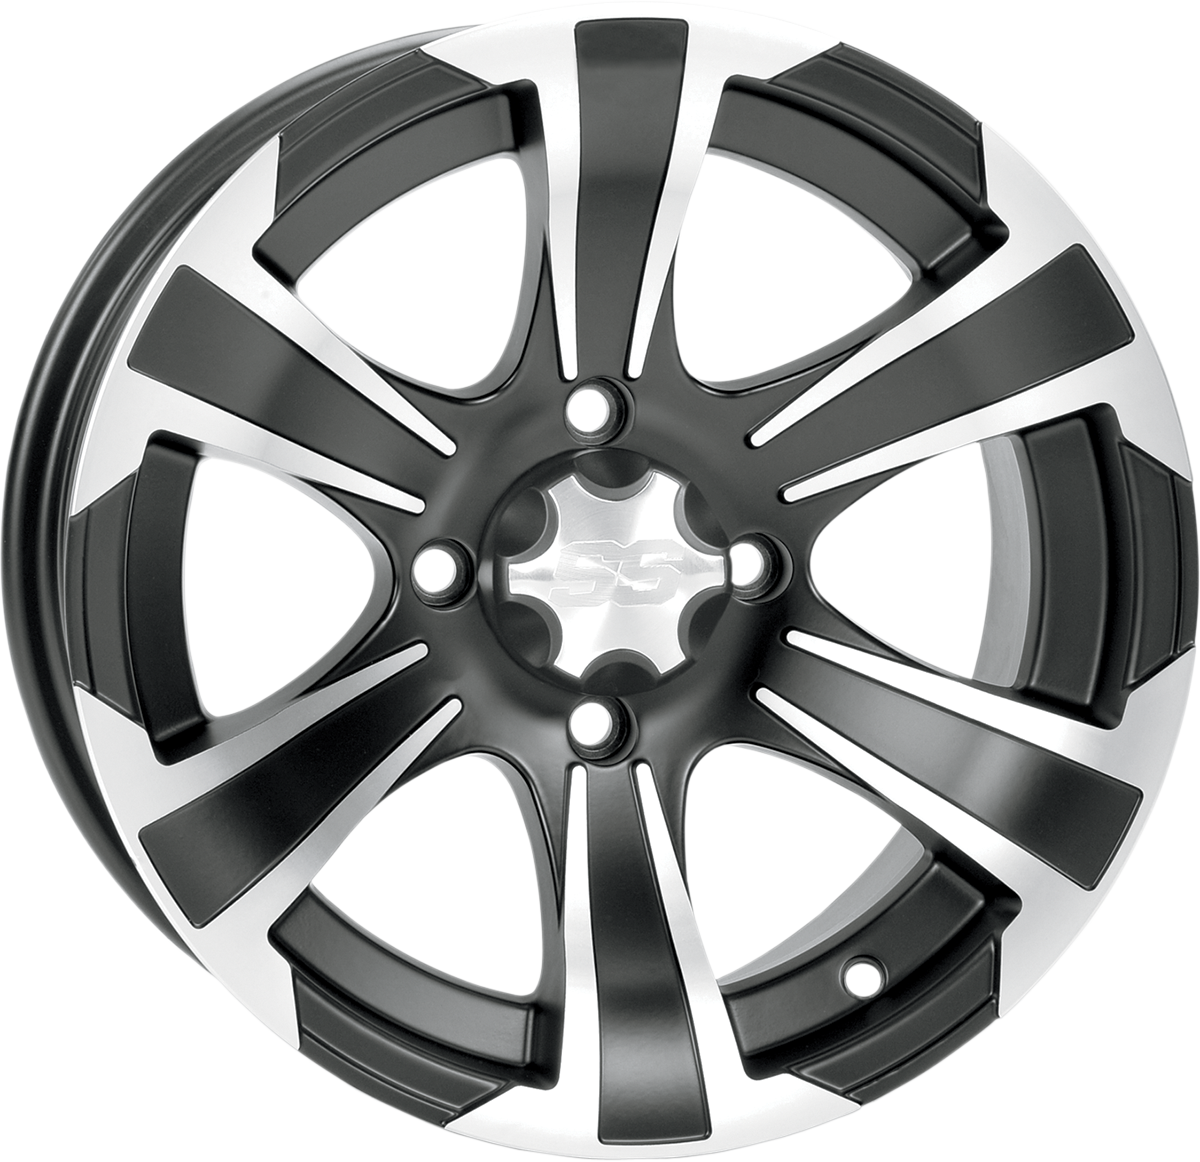 ITP SS312 Alloy Wheel - Front/Rear - Black Machined - 12x7 - 4/156 - 4+3 1228441536B